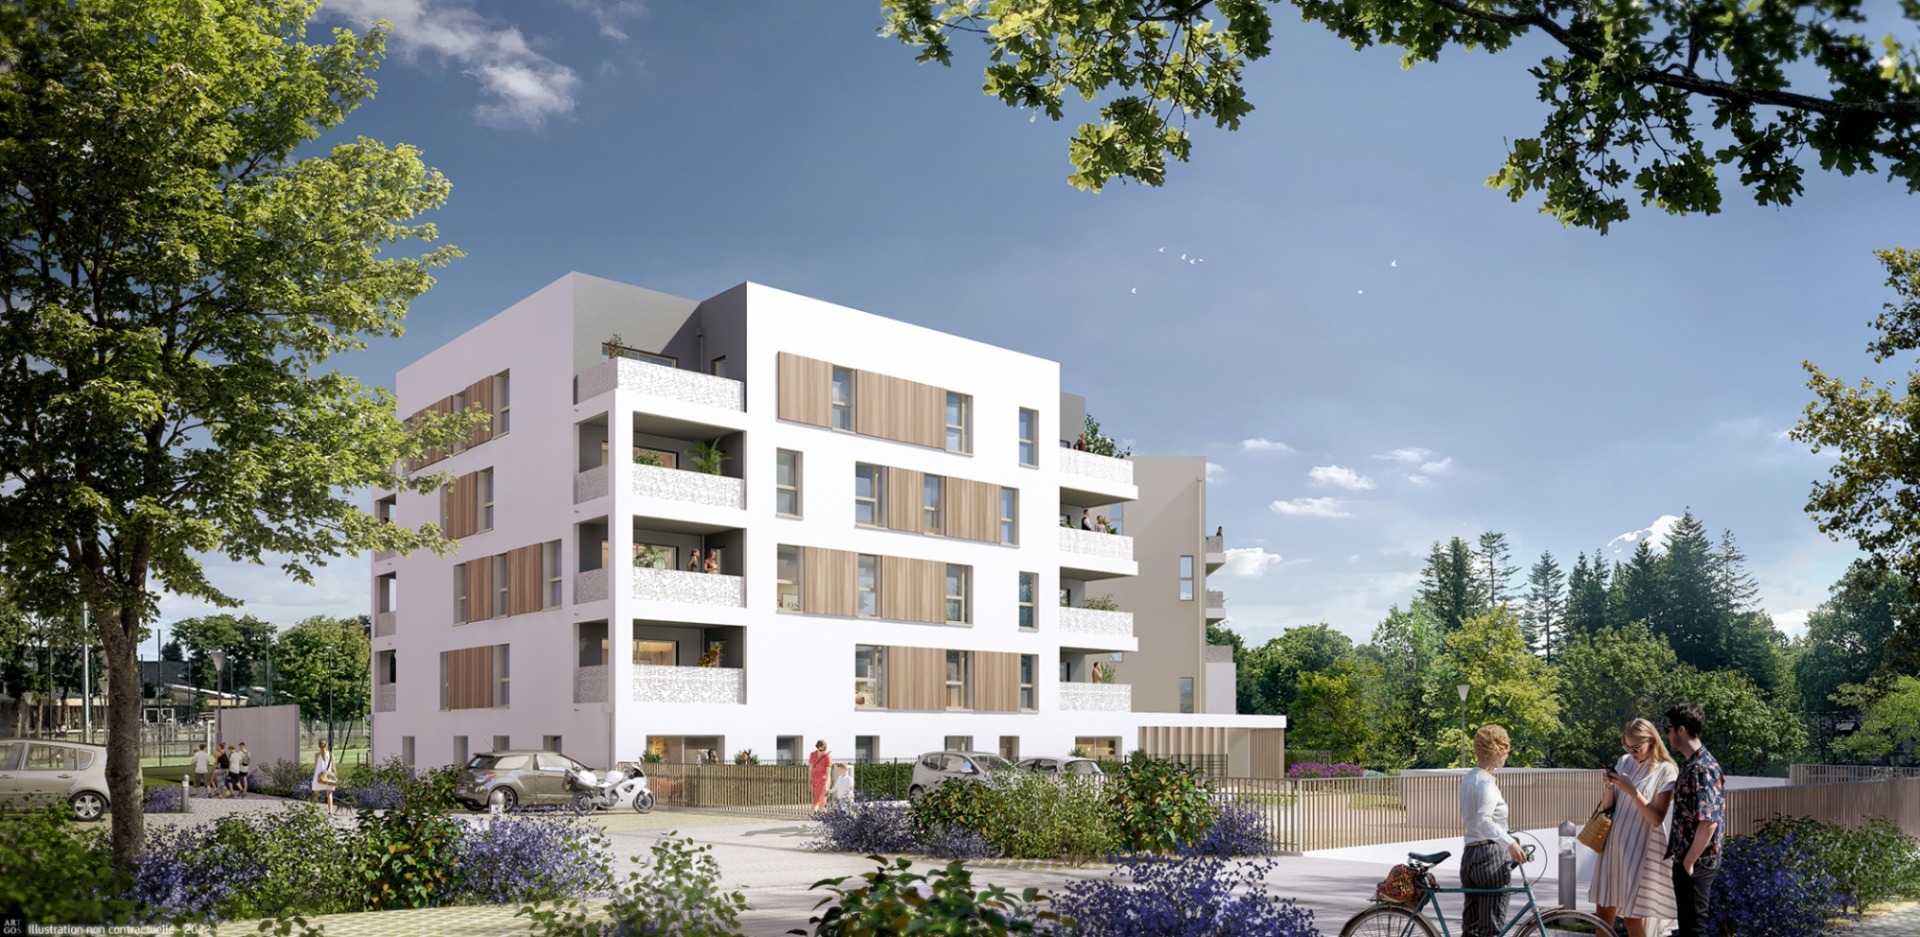 Programme immobilier neuf NATURE PSLA